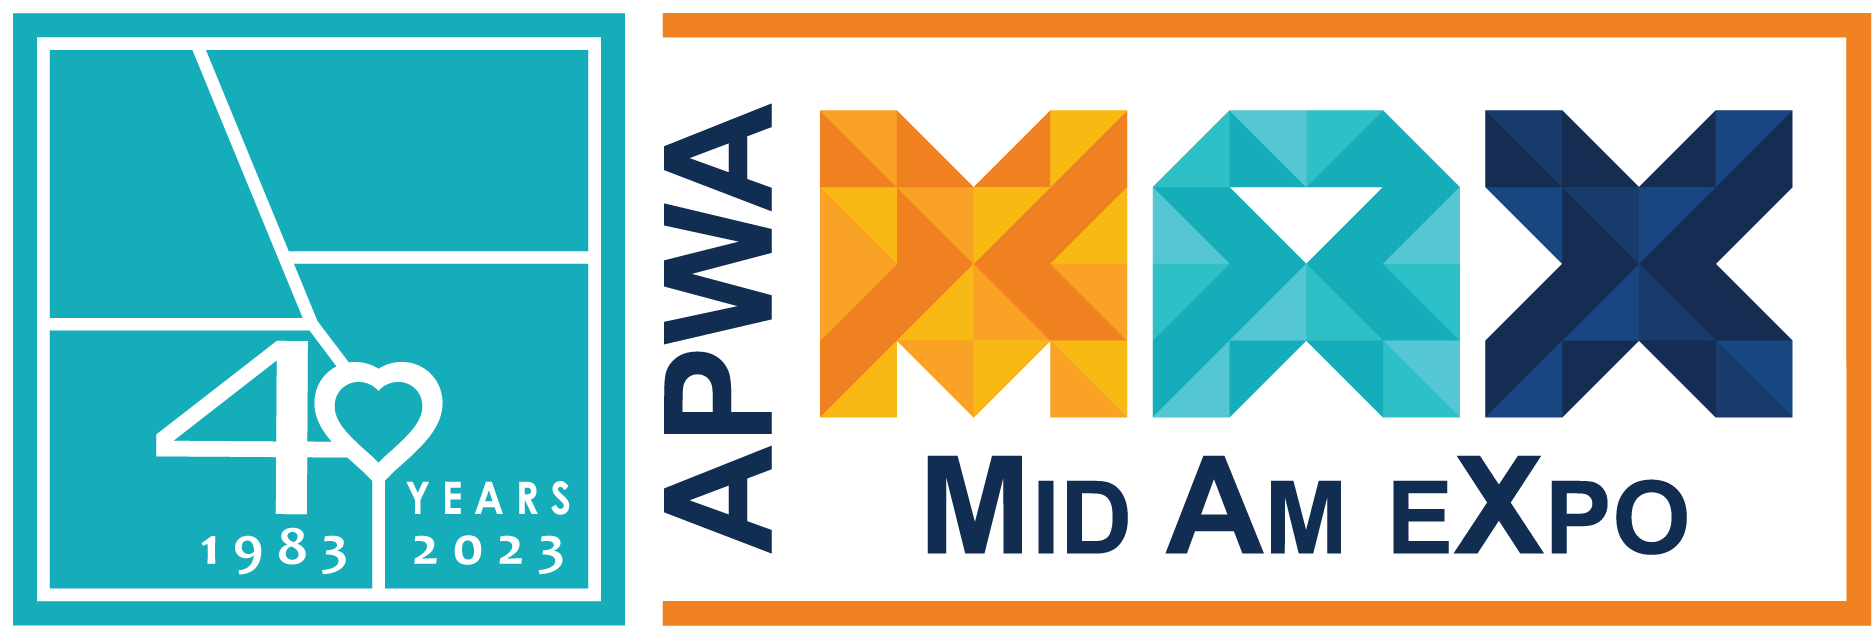 Celebrate 40 years of the APWA Mid Am Expo in Overland Park in May.